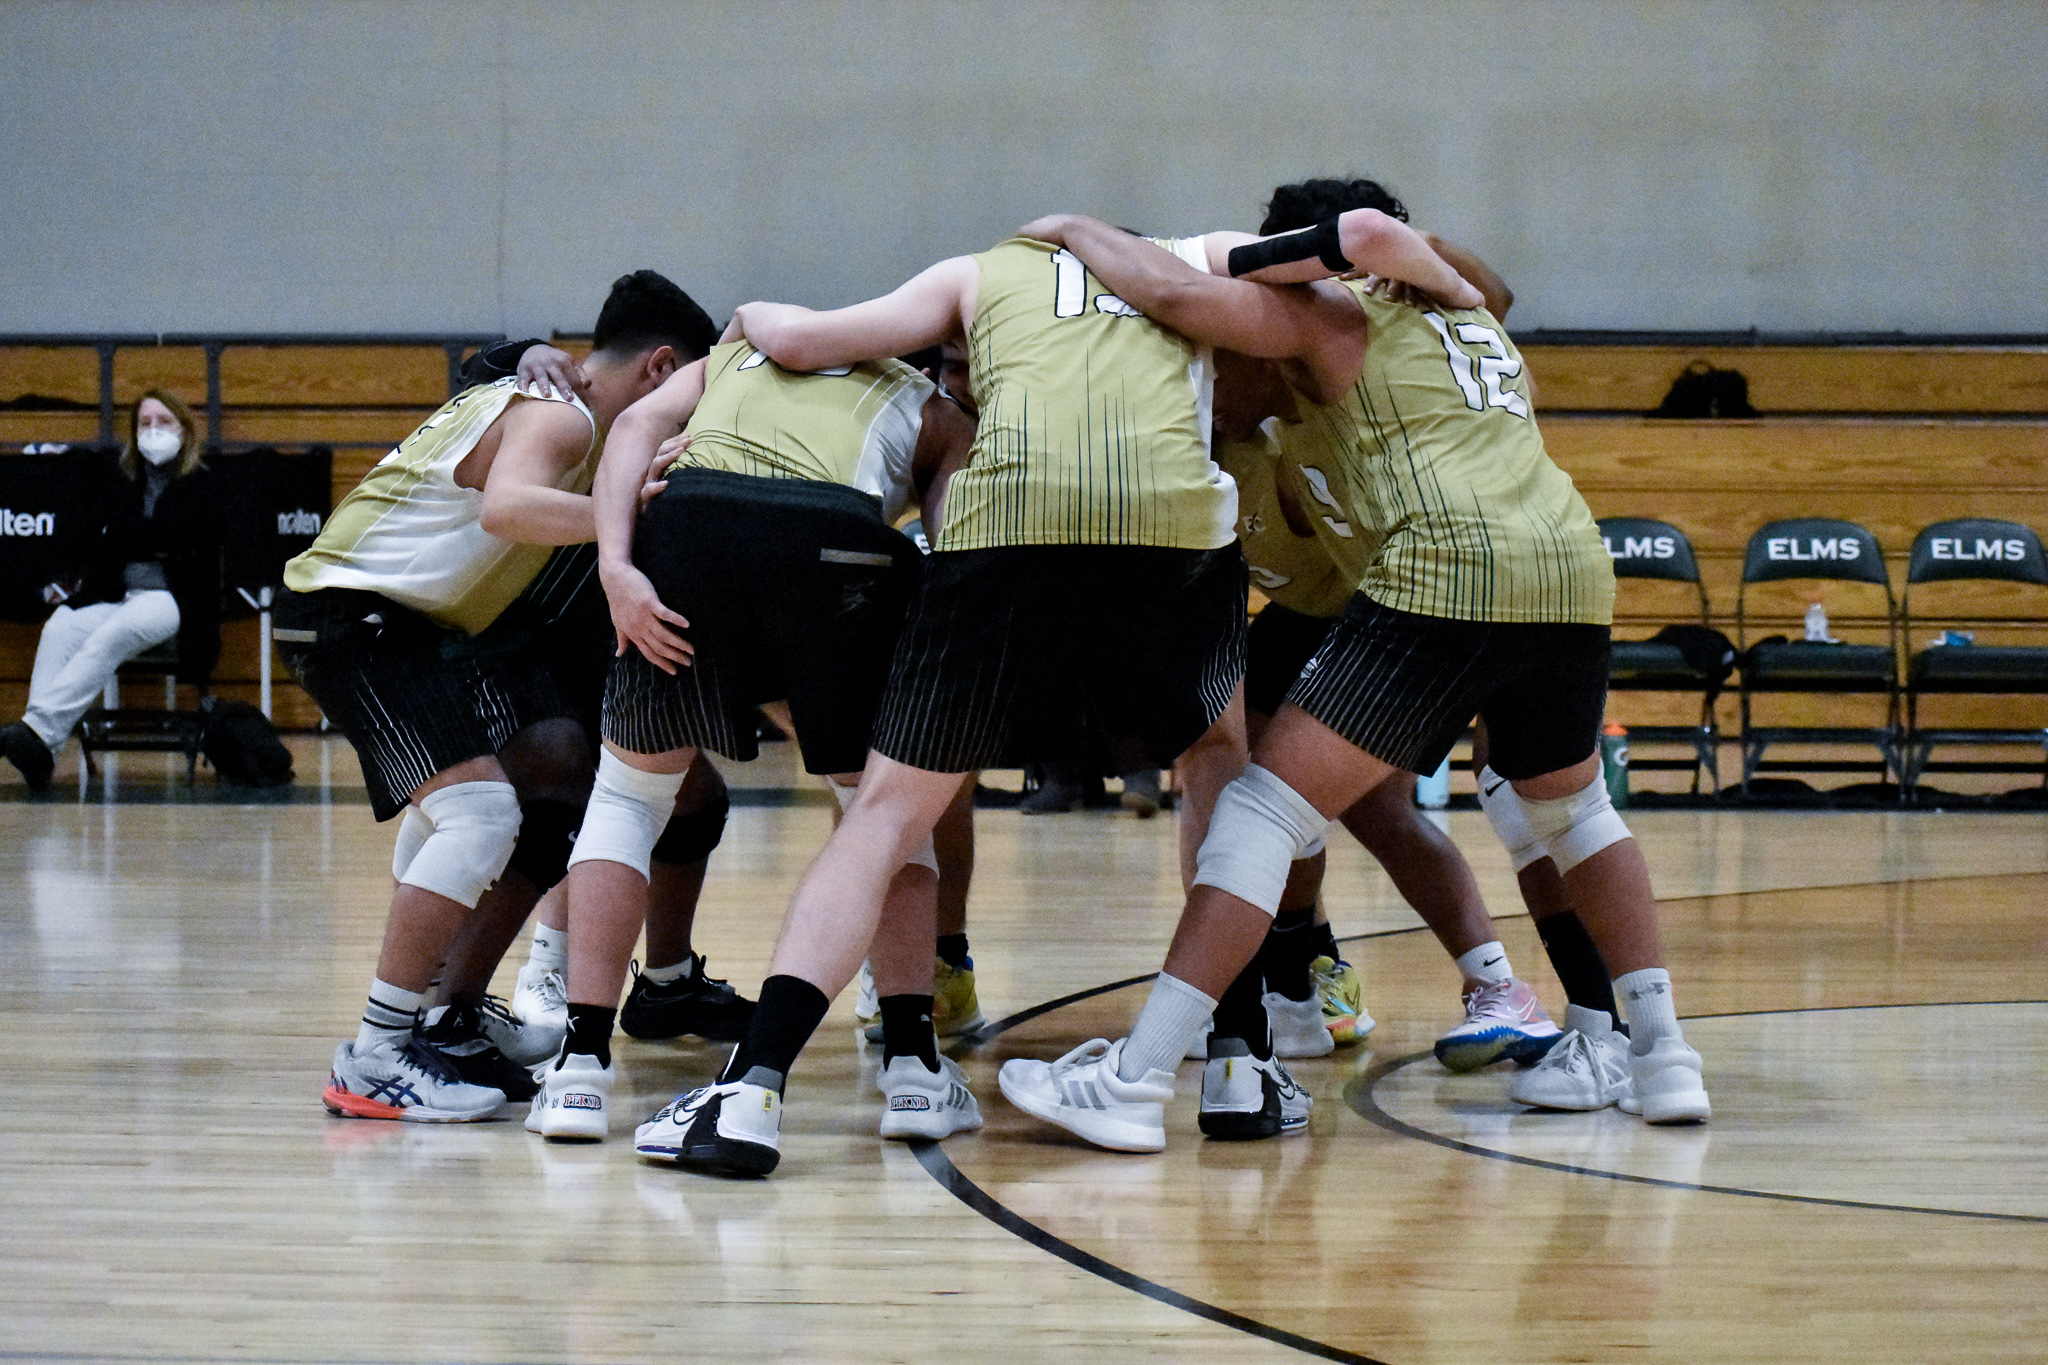 Elms men's volleyball in a team huddle